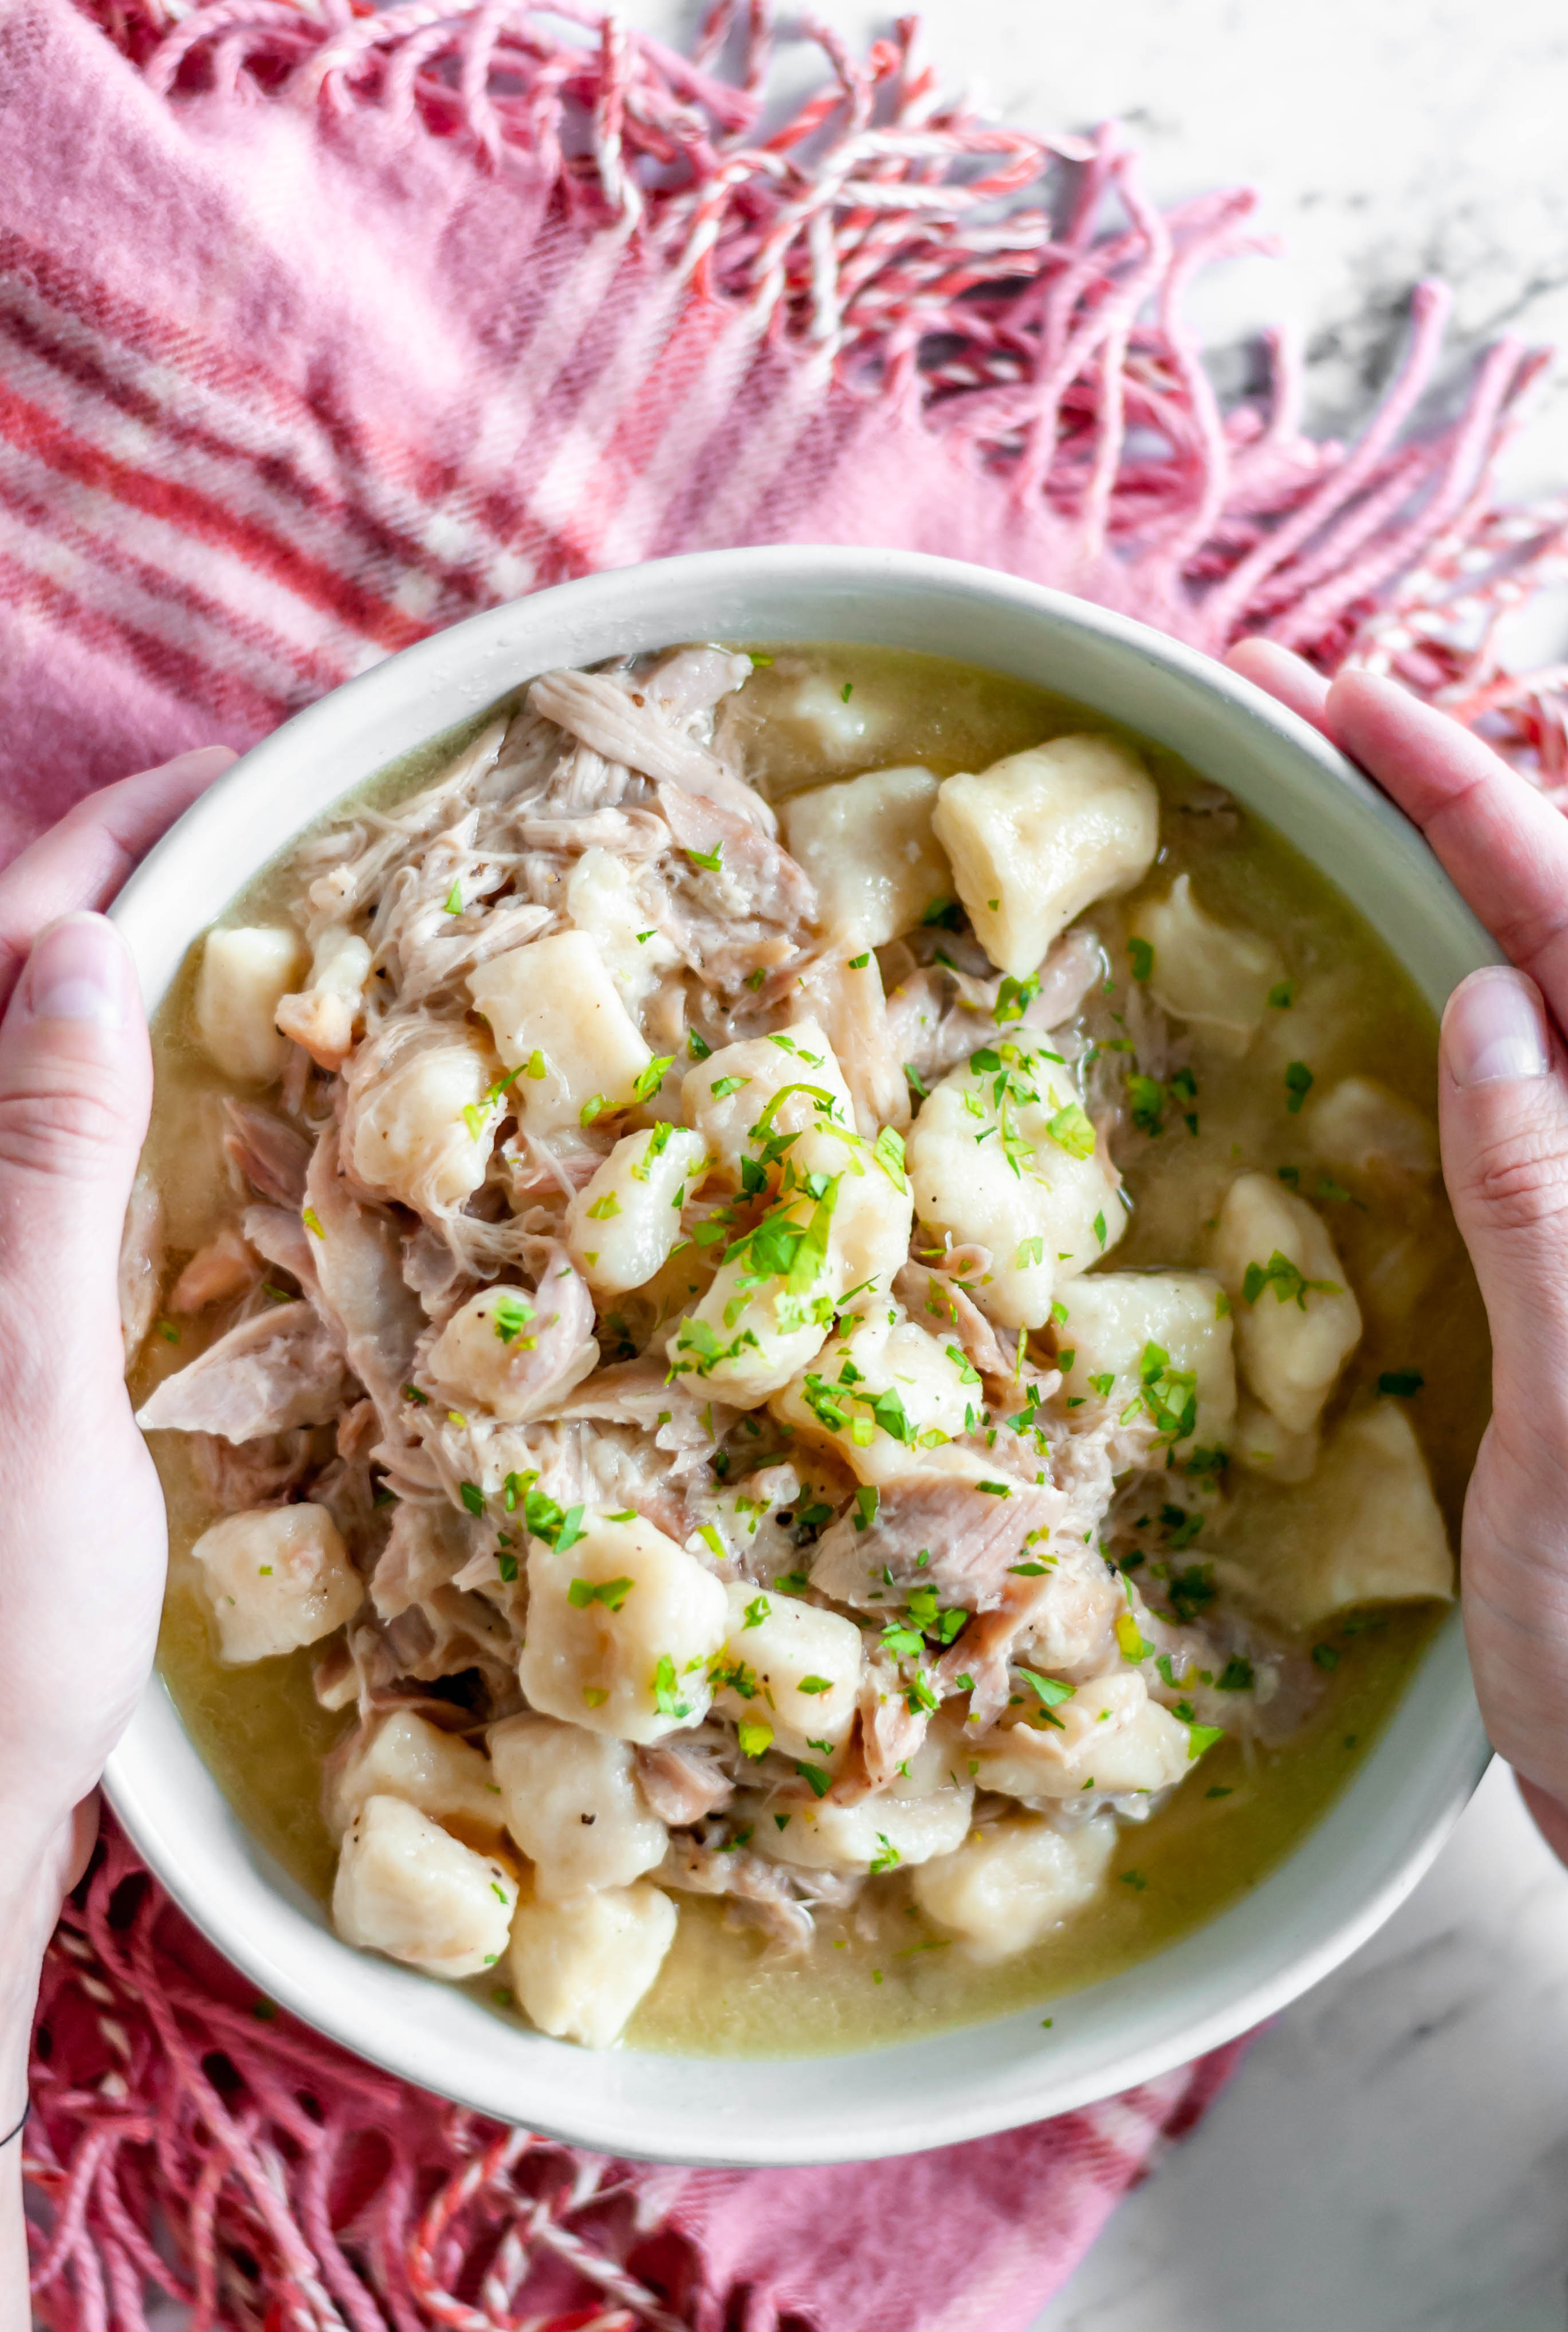 Cracker Barrel Chicken and Dumplings is a wonderful copycat of the restaurant favorite. Simple to make for cool nights.